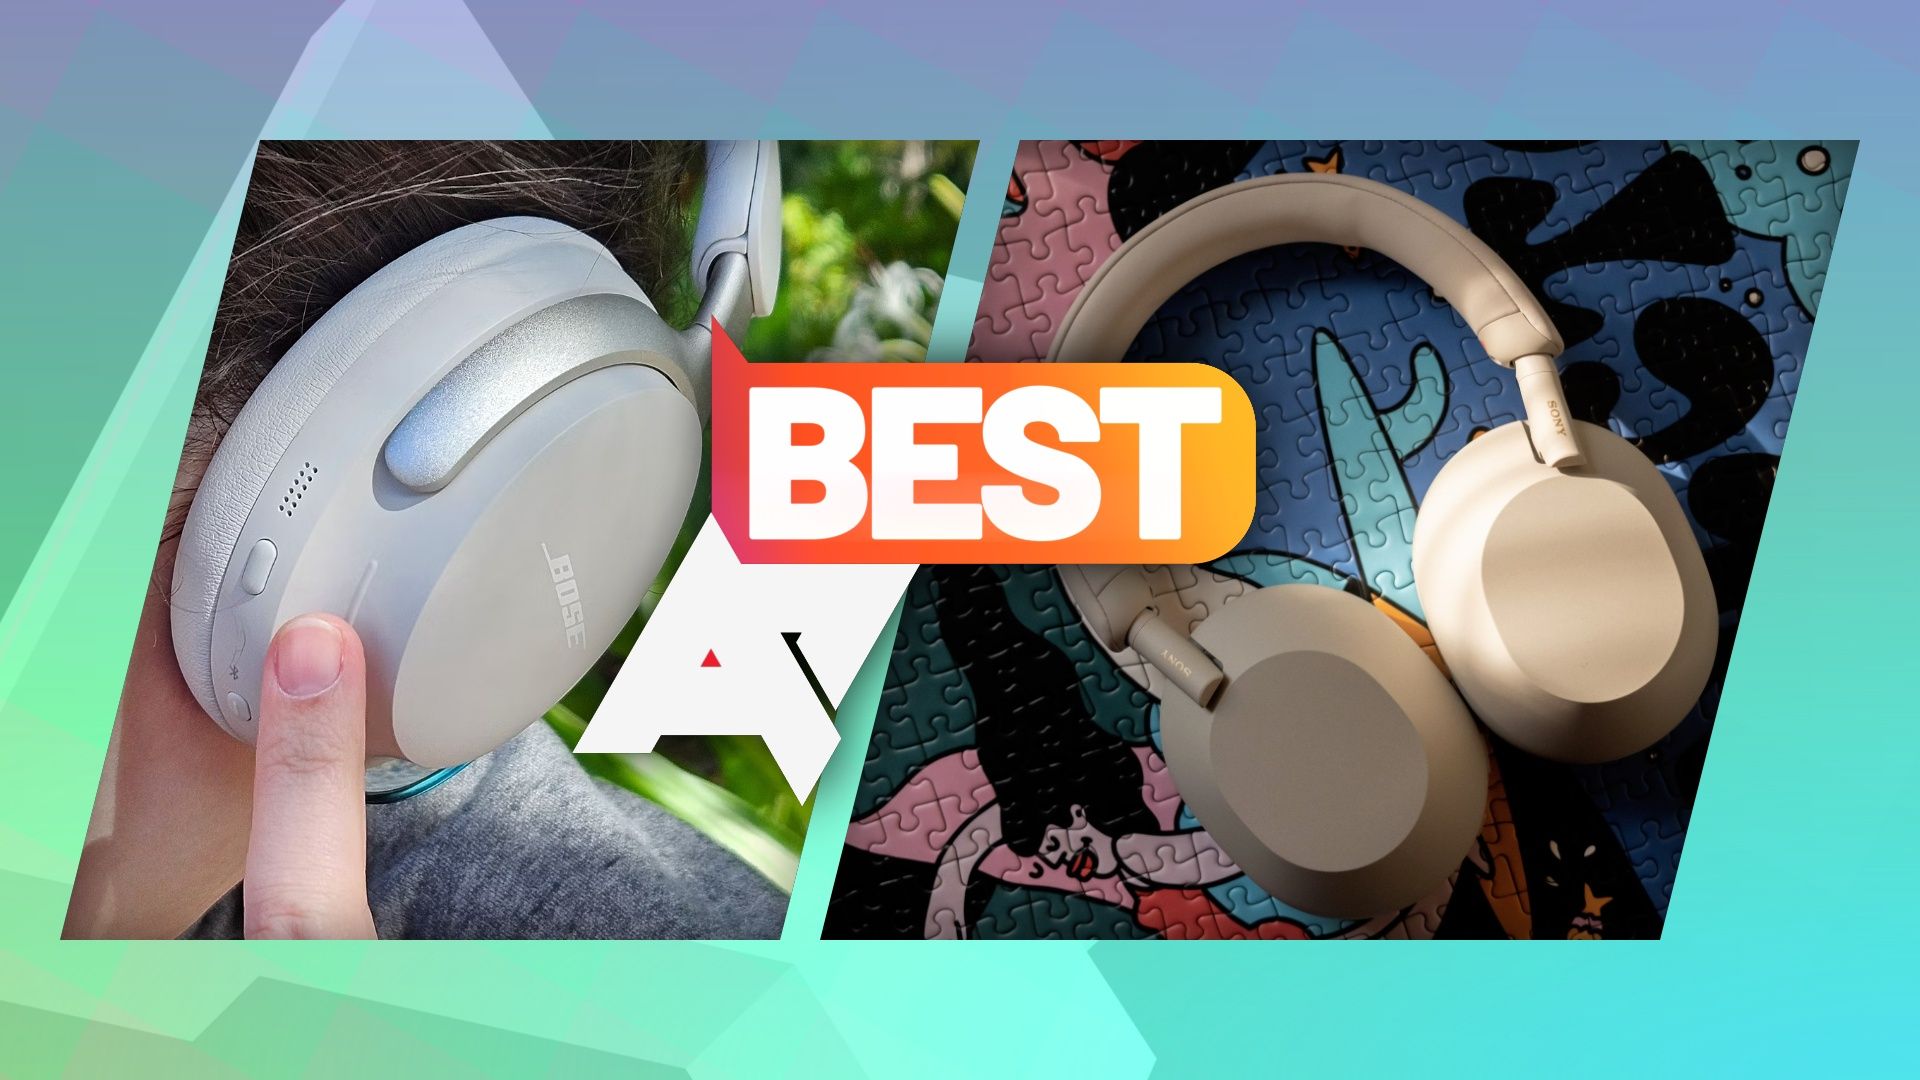 Photos of wireless headphones from Sony and Bose in front of a turquoise background, with an AP Best logo at the front